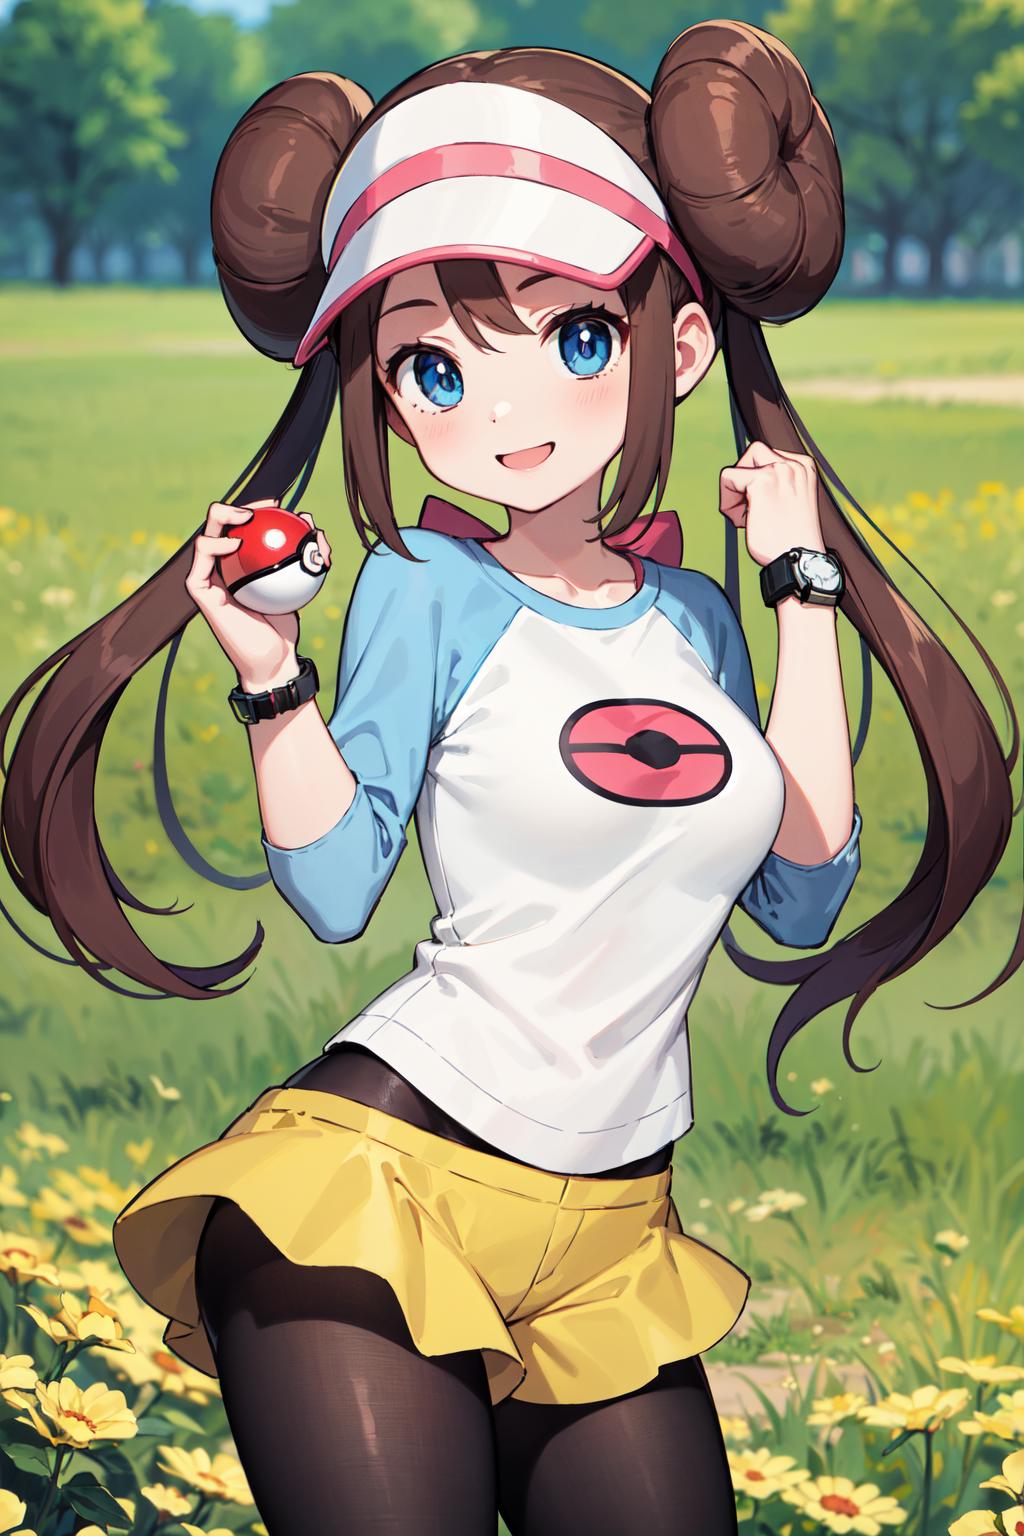 A young girl holding a Pokemon Pokeball in a field, wearing a white and blue shirt.